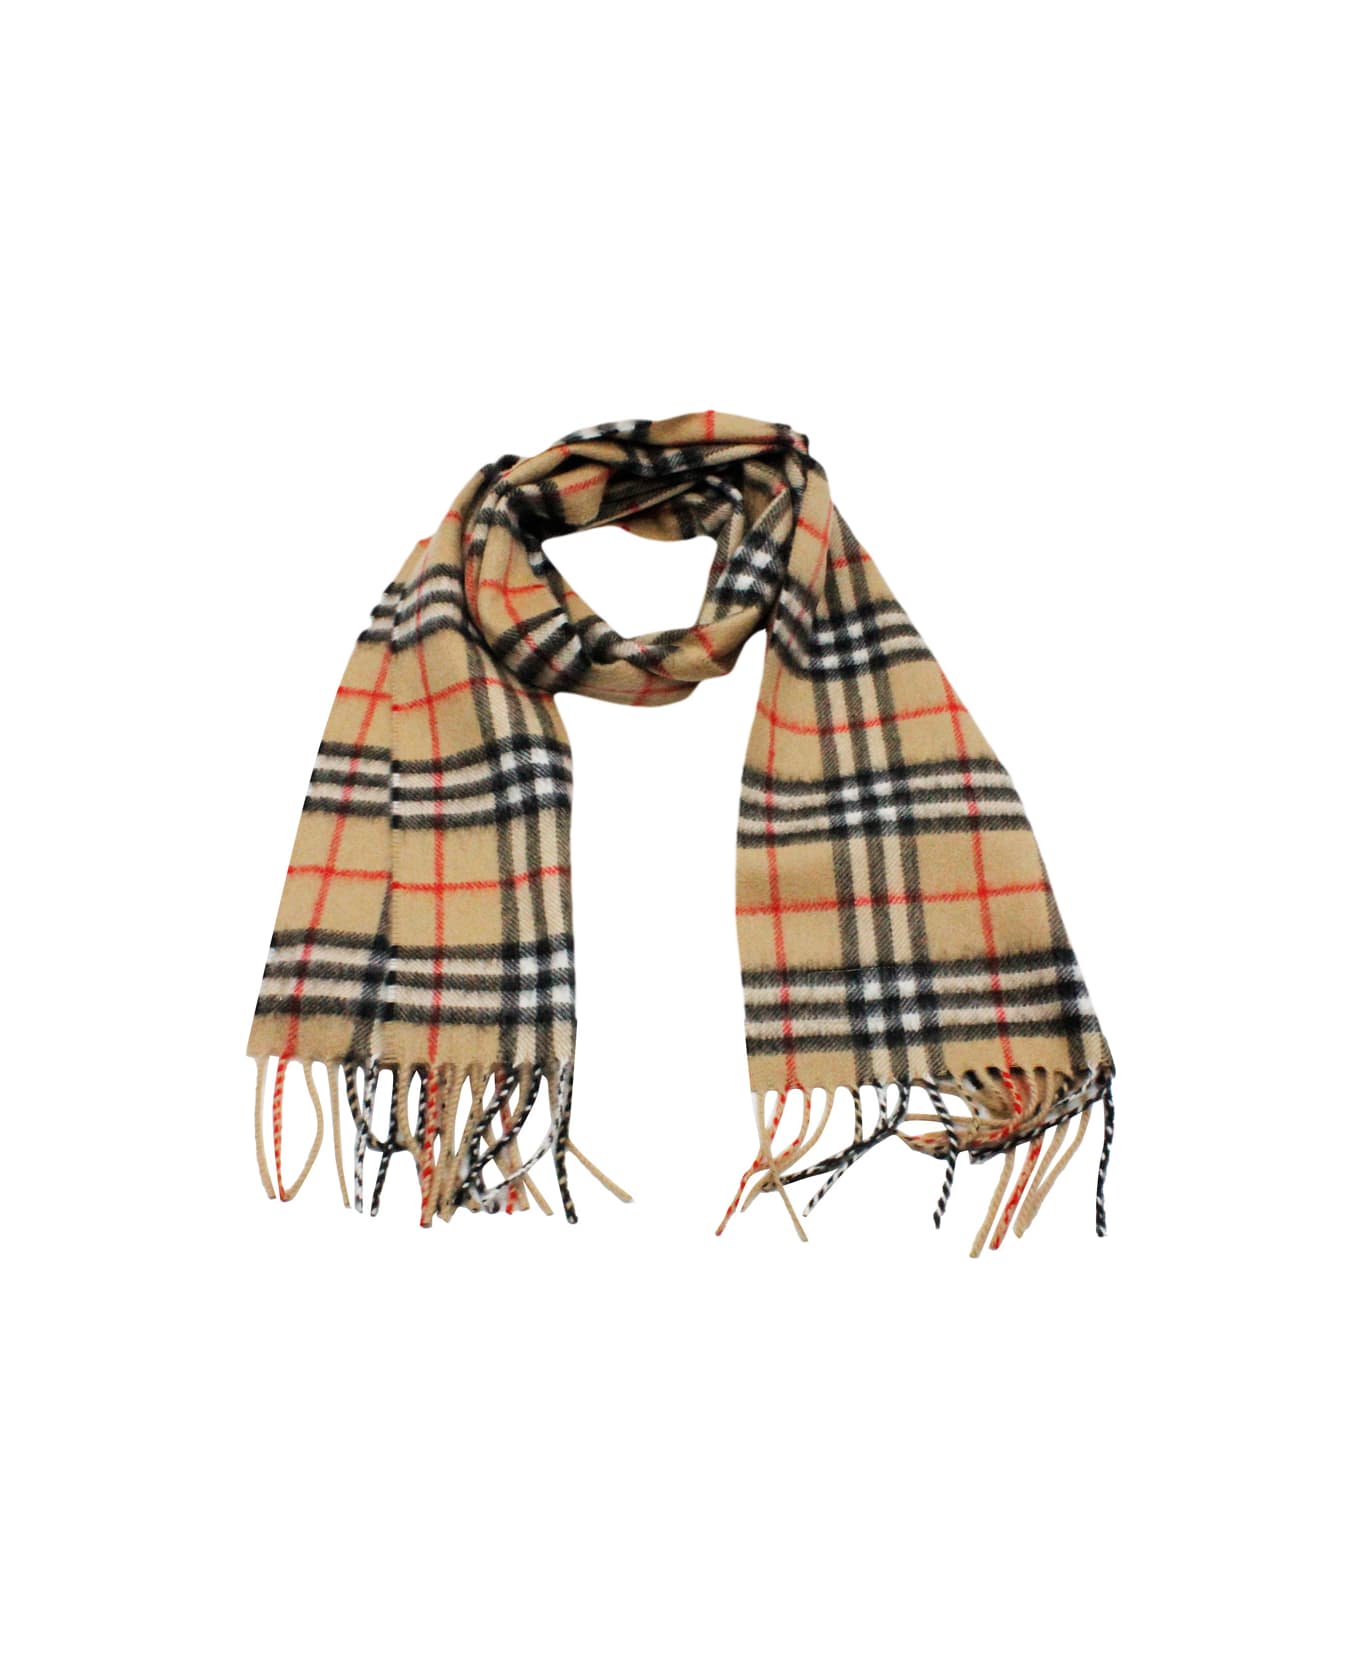 Burberry Scarf In Pure And Soft Cashmere With Check Pattern And Fringes At The Hem Measuring 130 X 20 - Check Beige アクセサリー＆ギフト